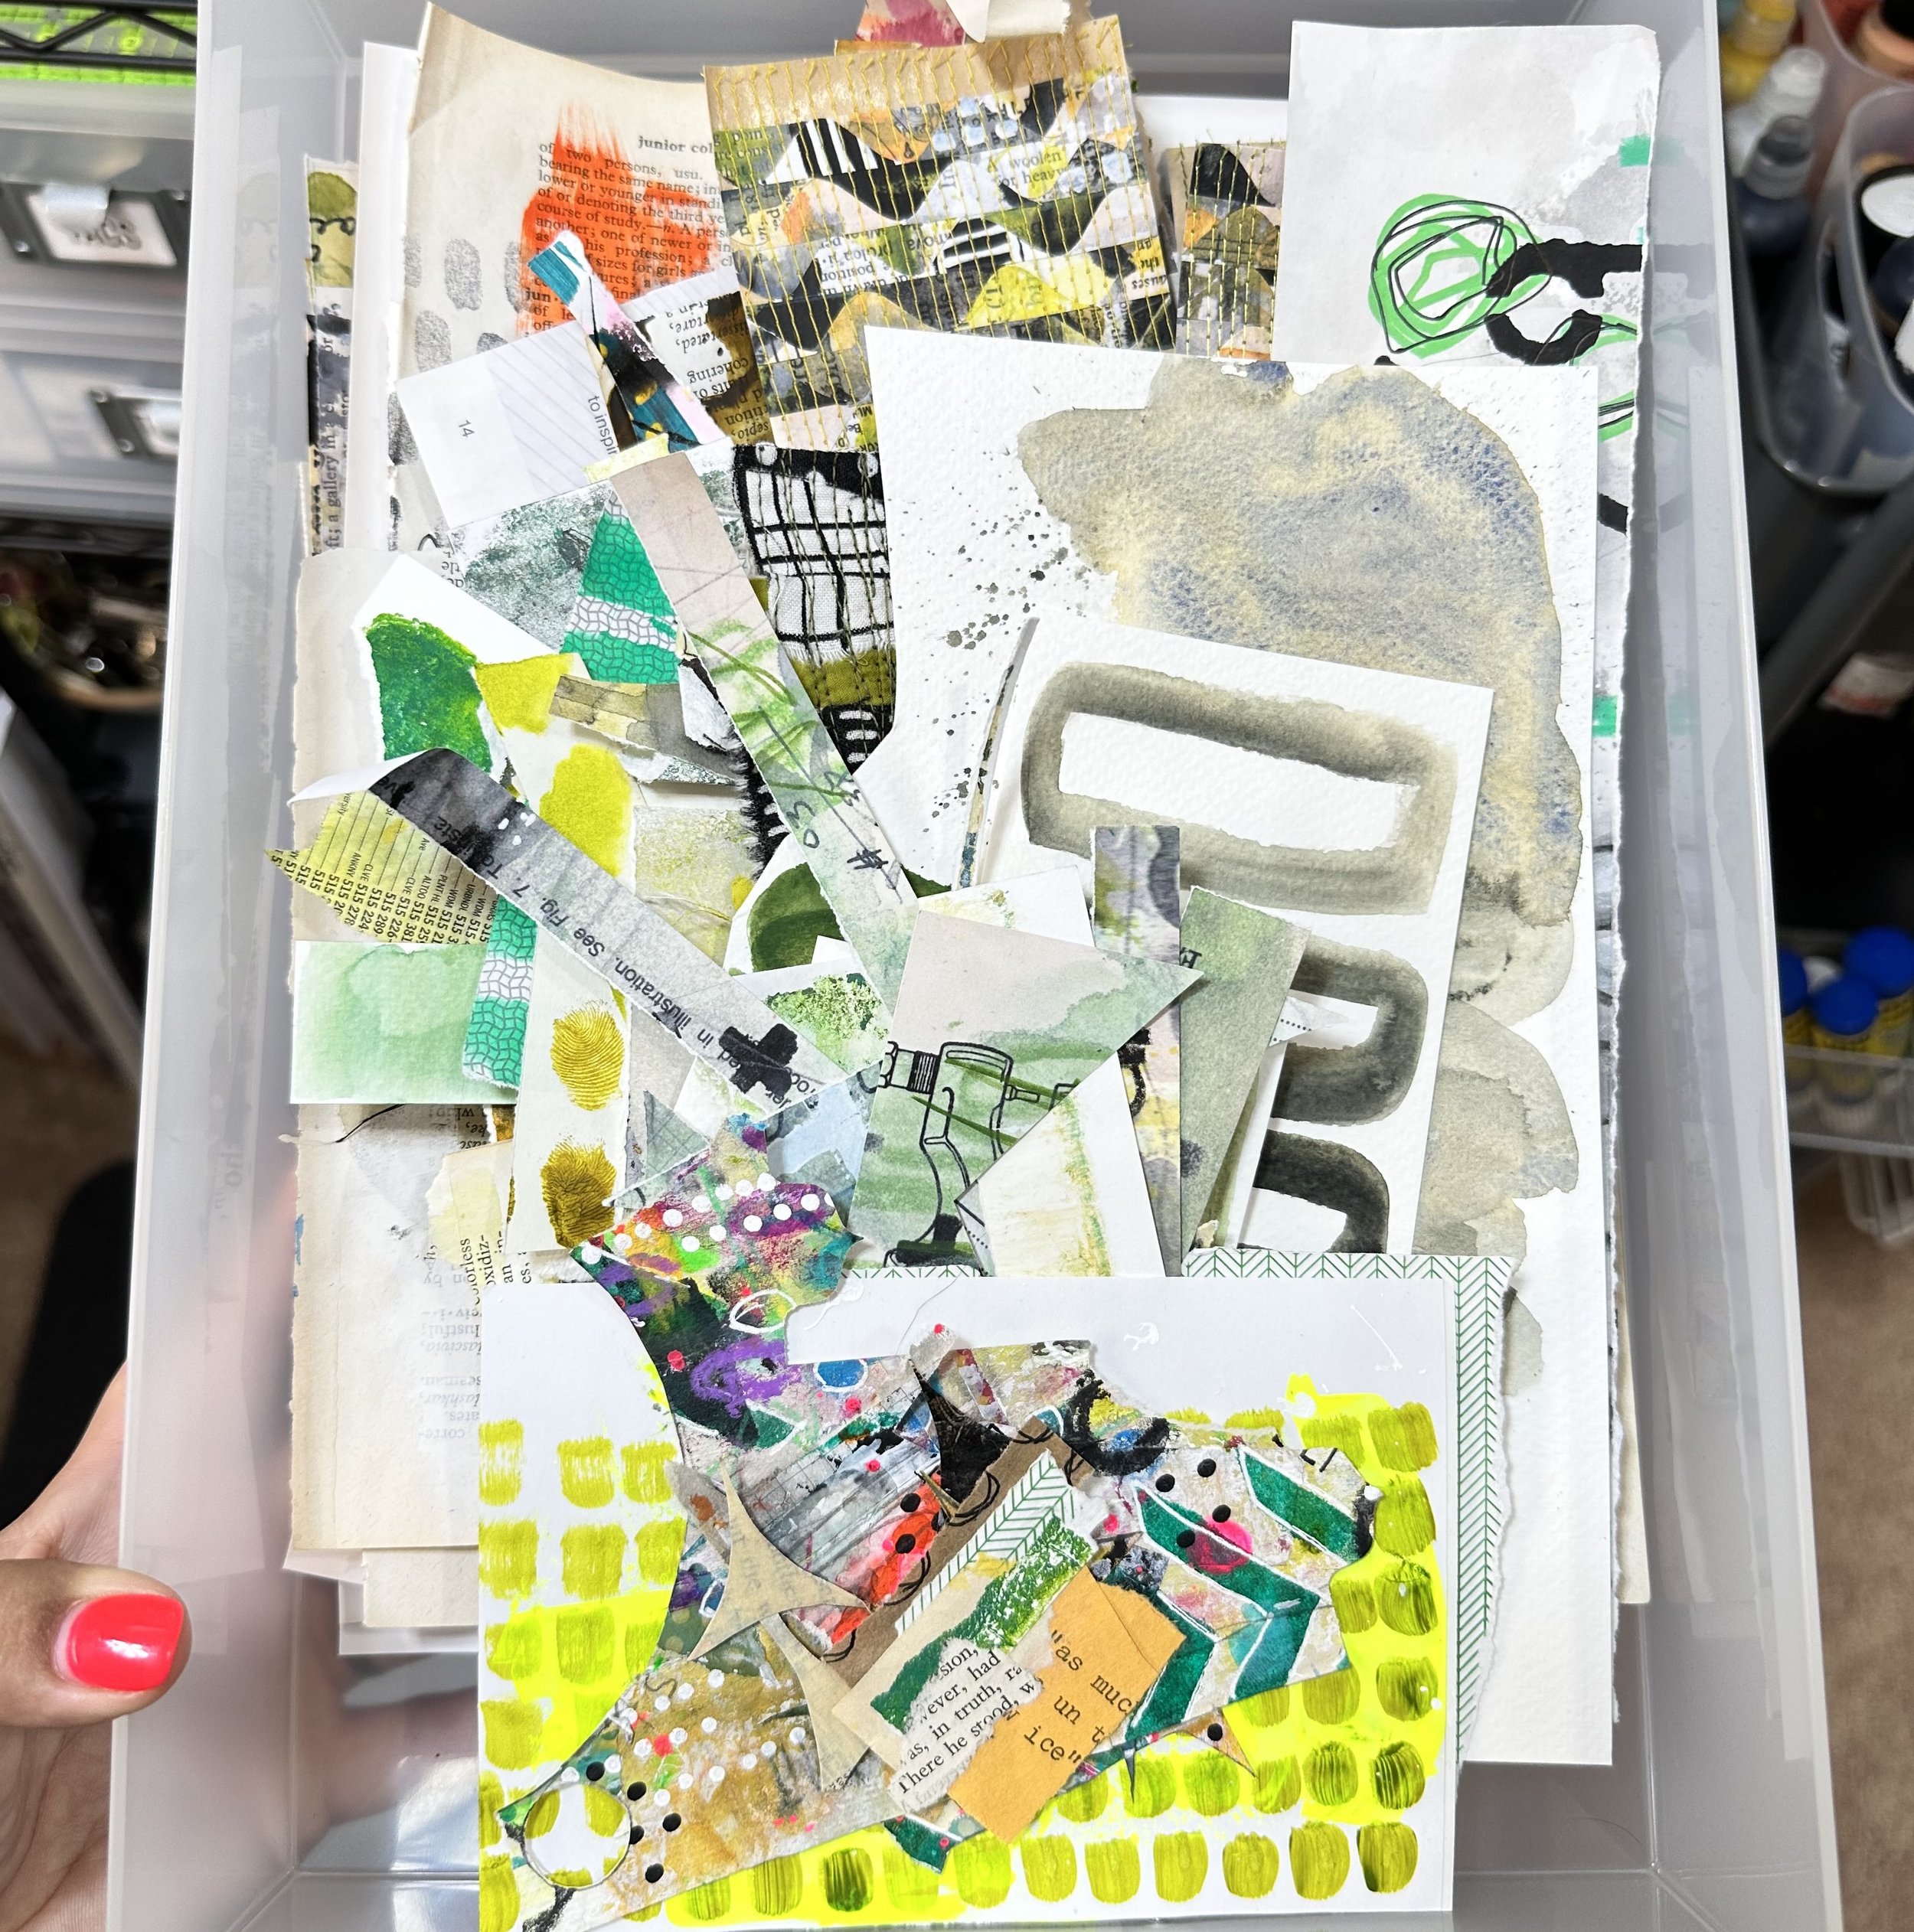  If you're an artist or crafter, you know how quickly paper supplies can pile up in your workspace. In this post, I take you on a tour of my art studio and show you how I keep my paper organized and within reach. From my favorite paper storage soluti